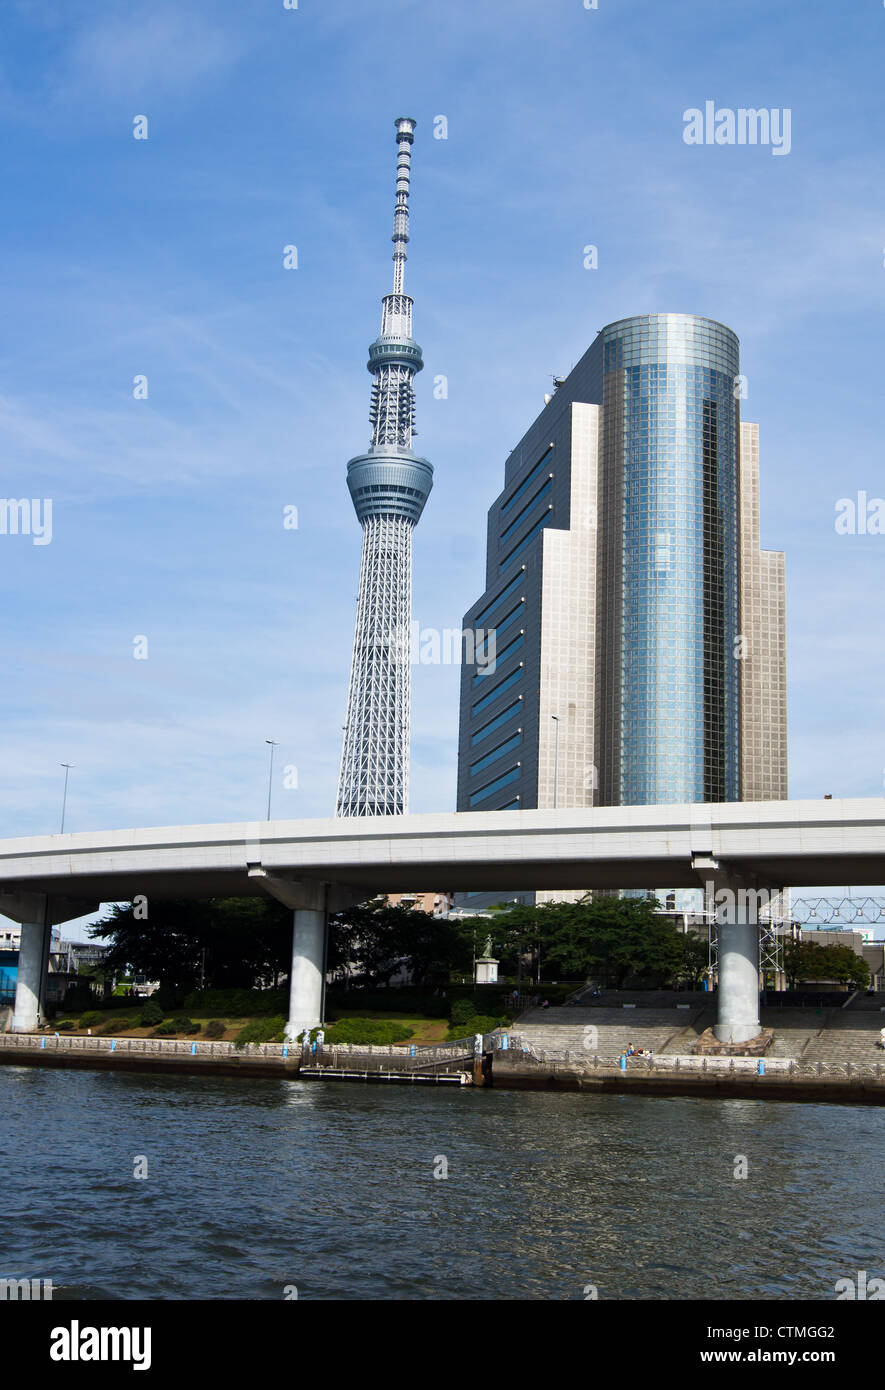 A view of Tokyo's Skytree tower Stock Photo